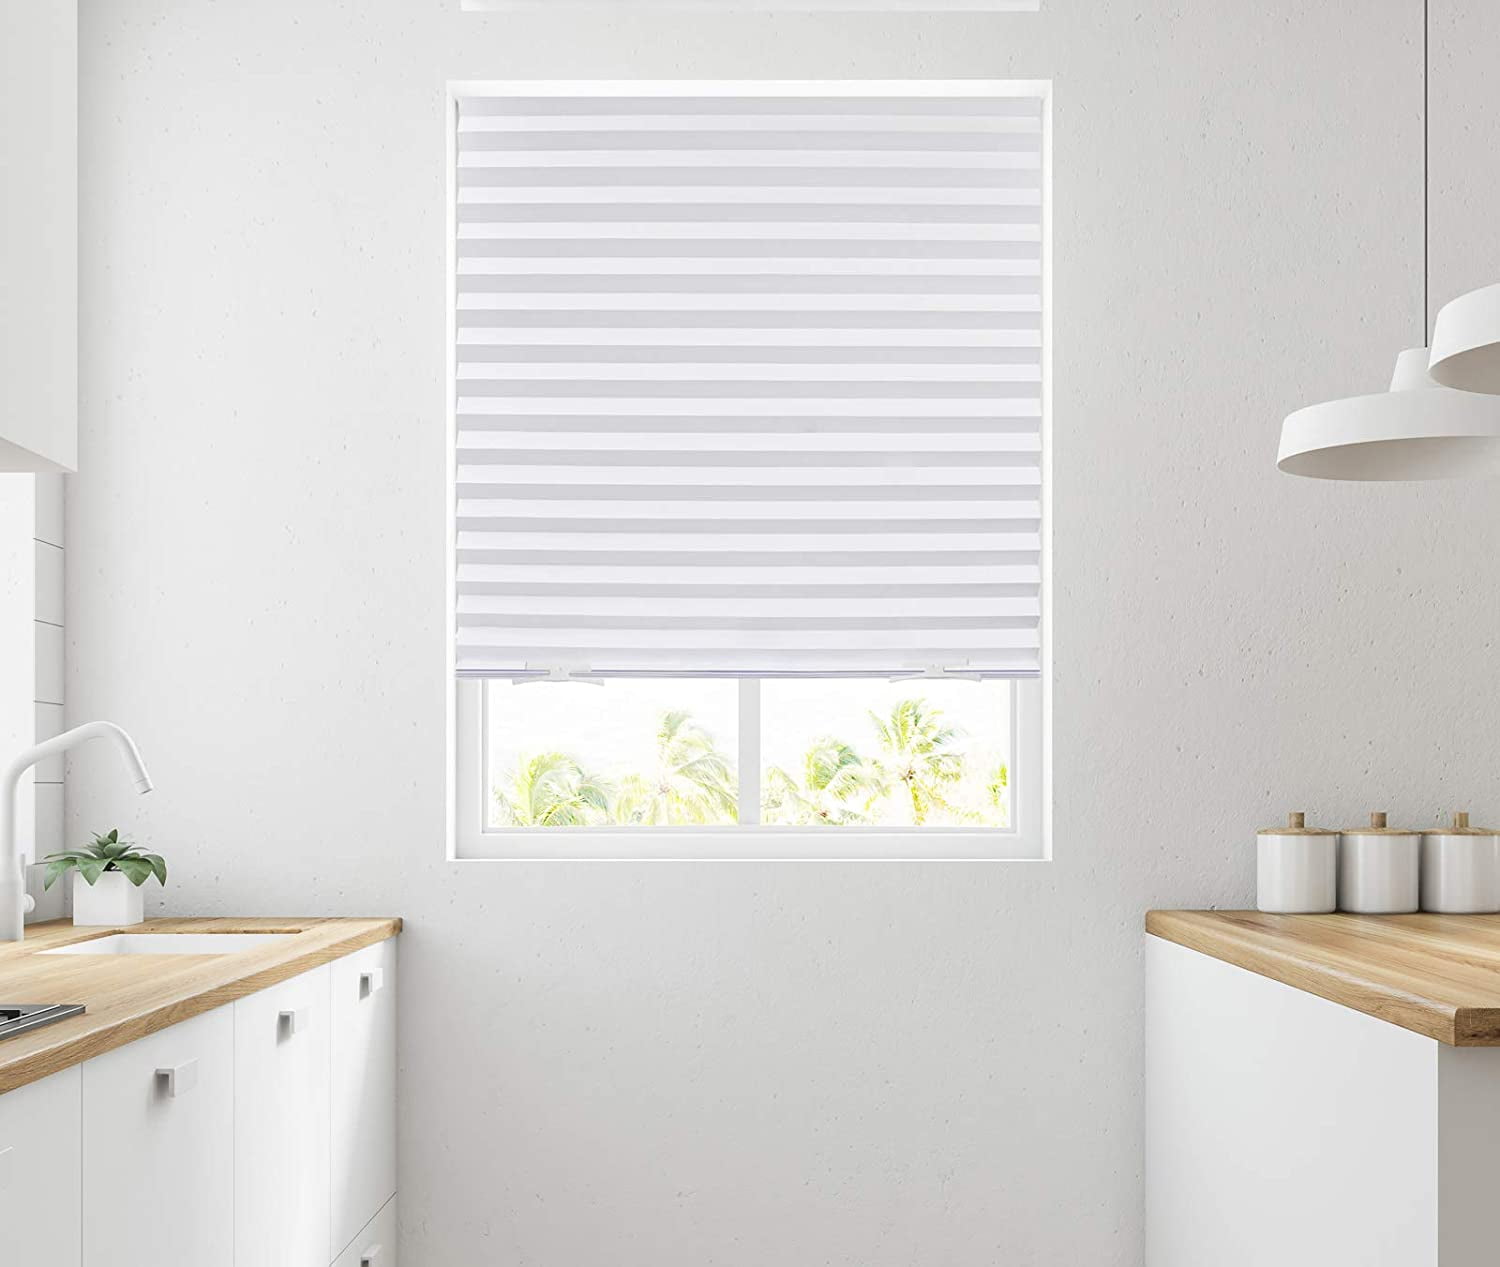 Pack of 6 Light Filtering Pleated Paper Shades White 36" x 69" MULTI PACK 